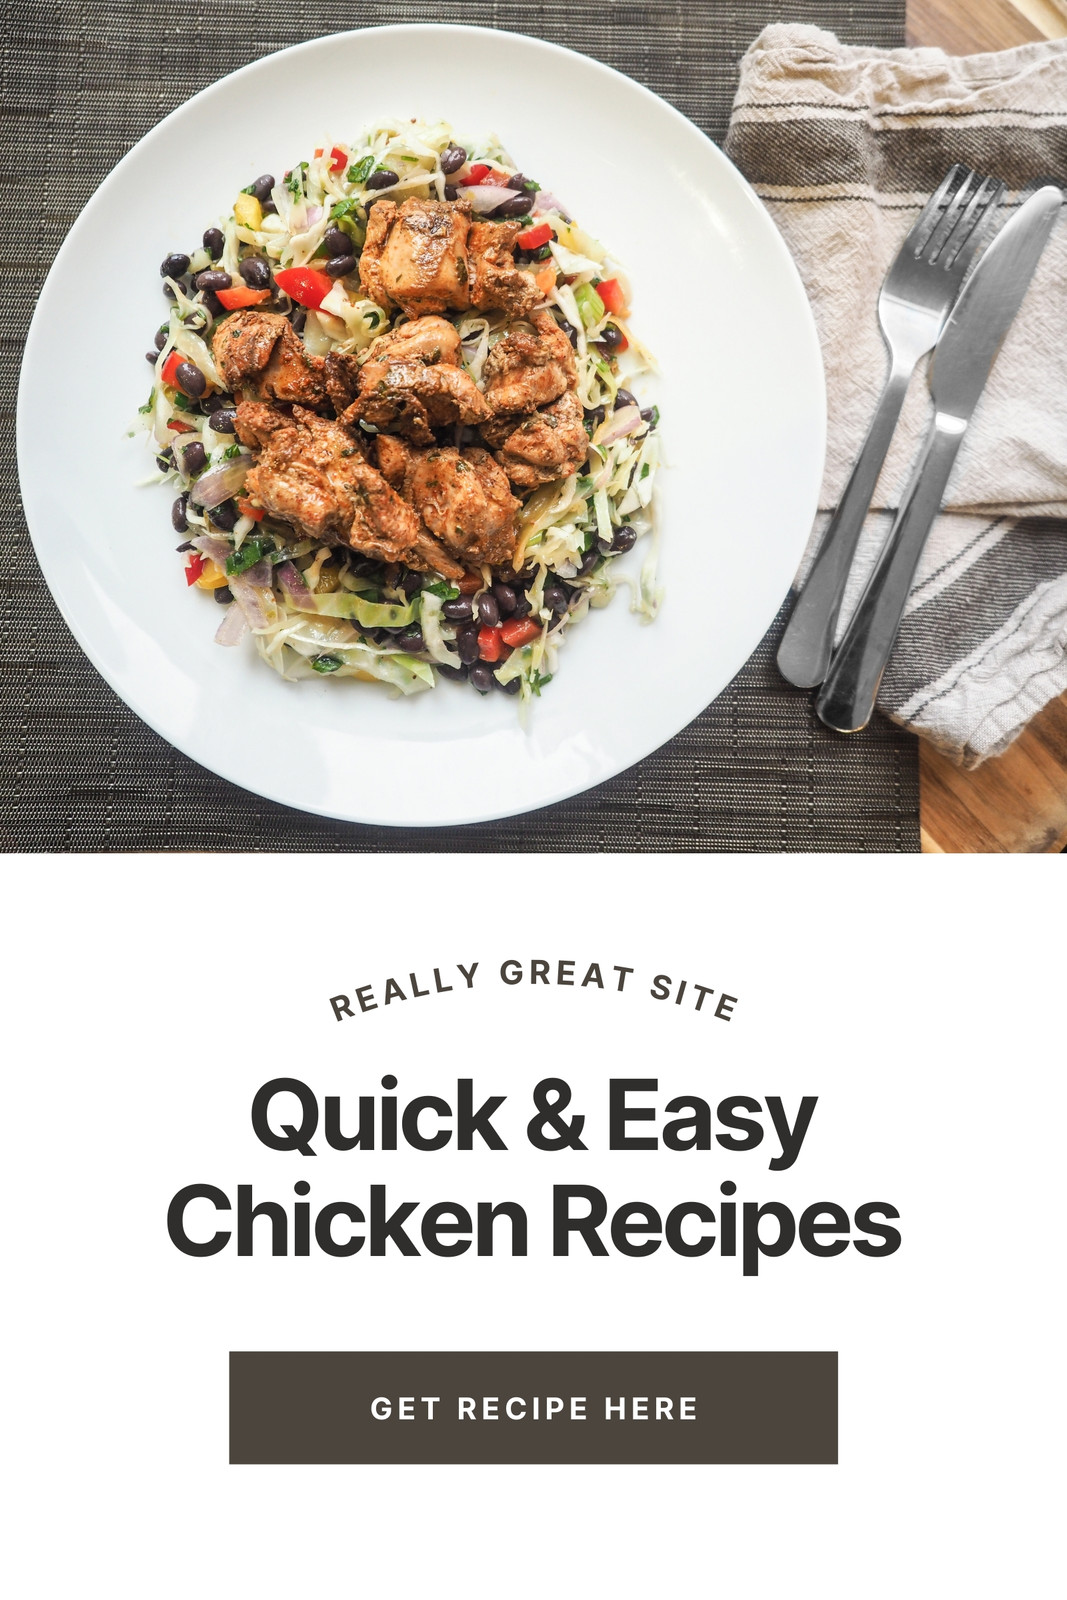 Page 5 - Free and customizable recipe templates